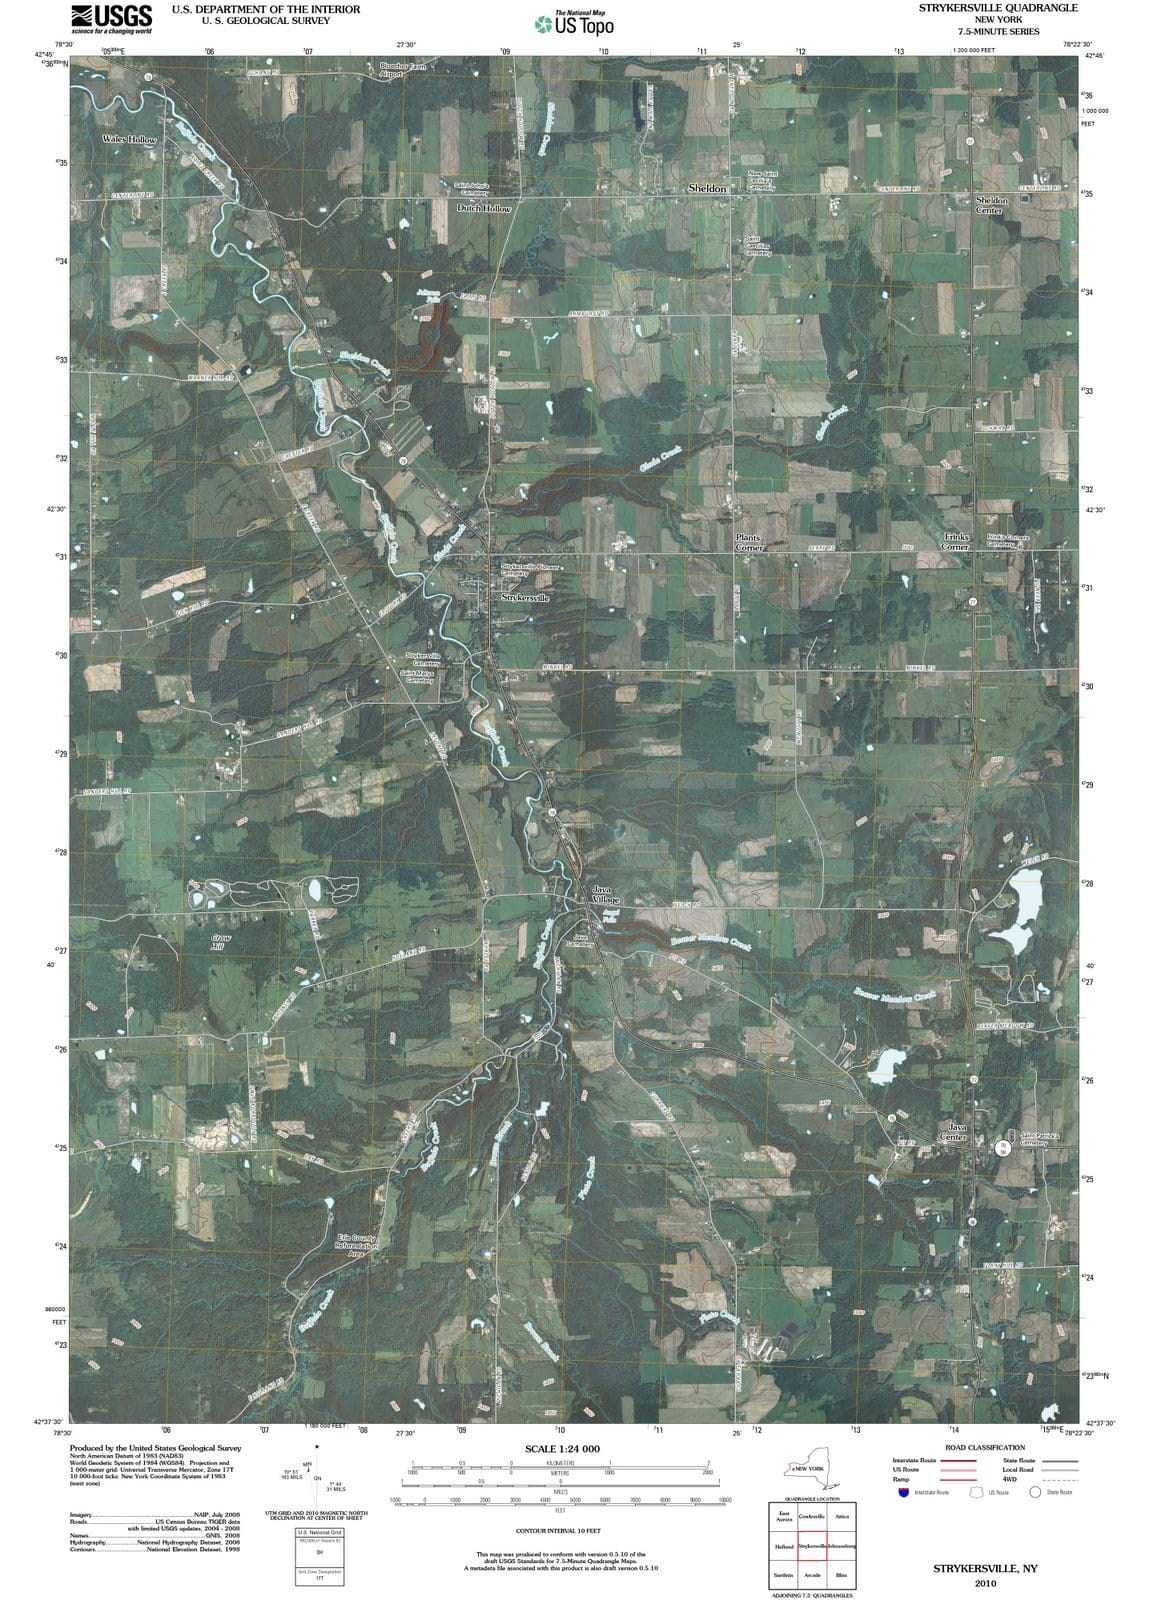 2010 Strykersville, NY - New York - USGS Topographic Map